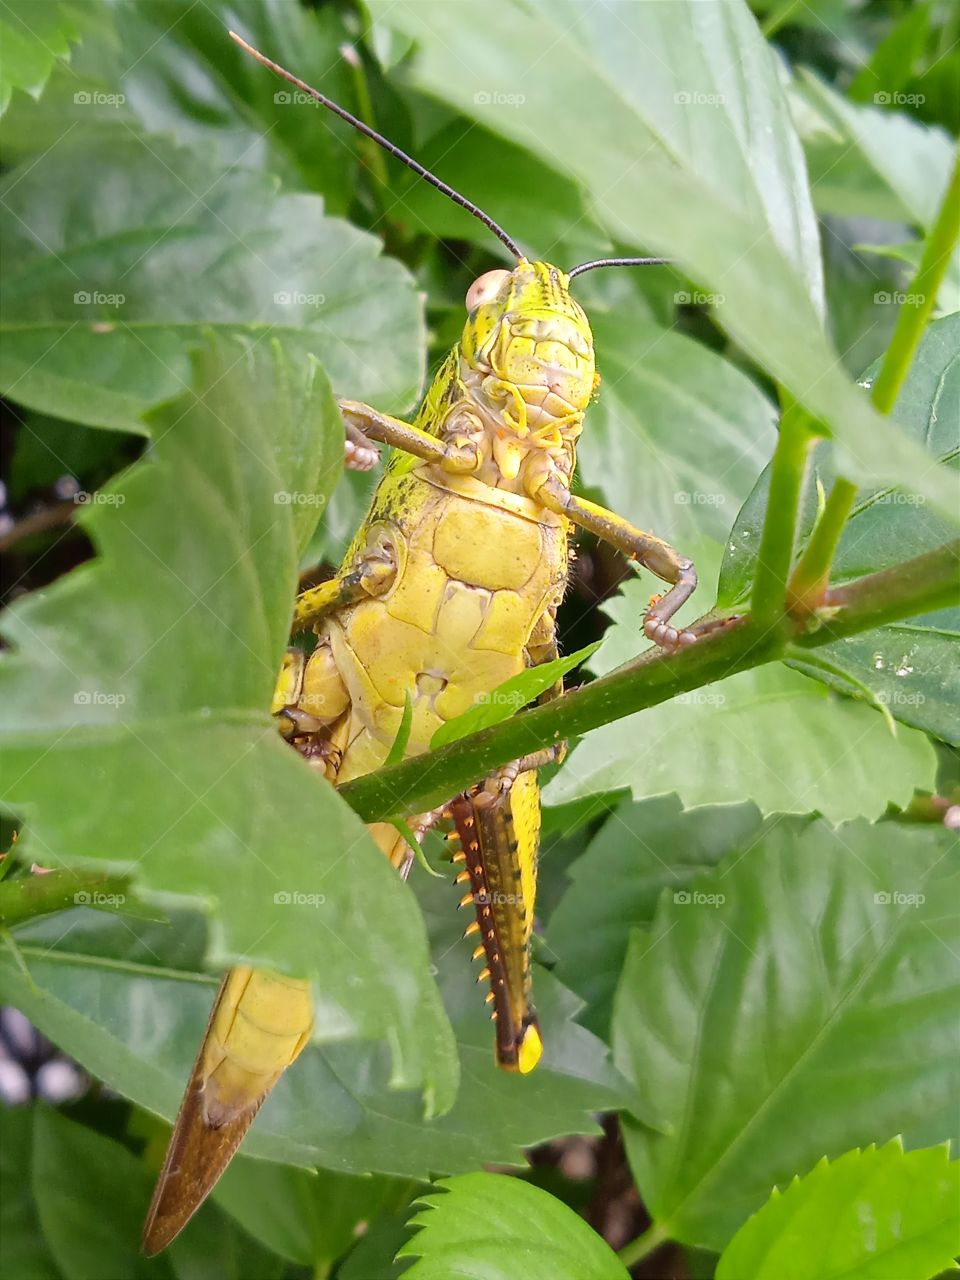 The strong body of the grasshopper.